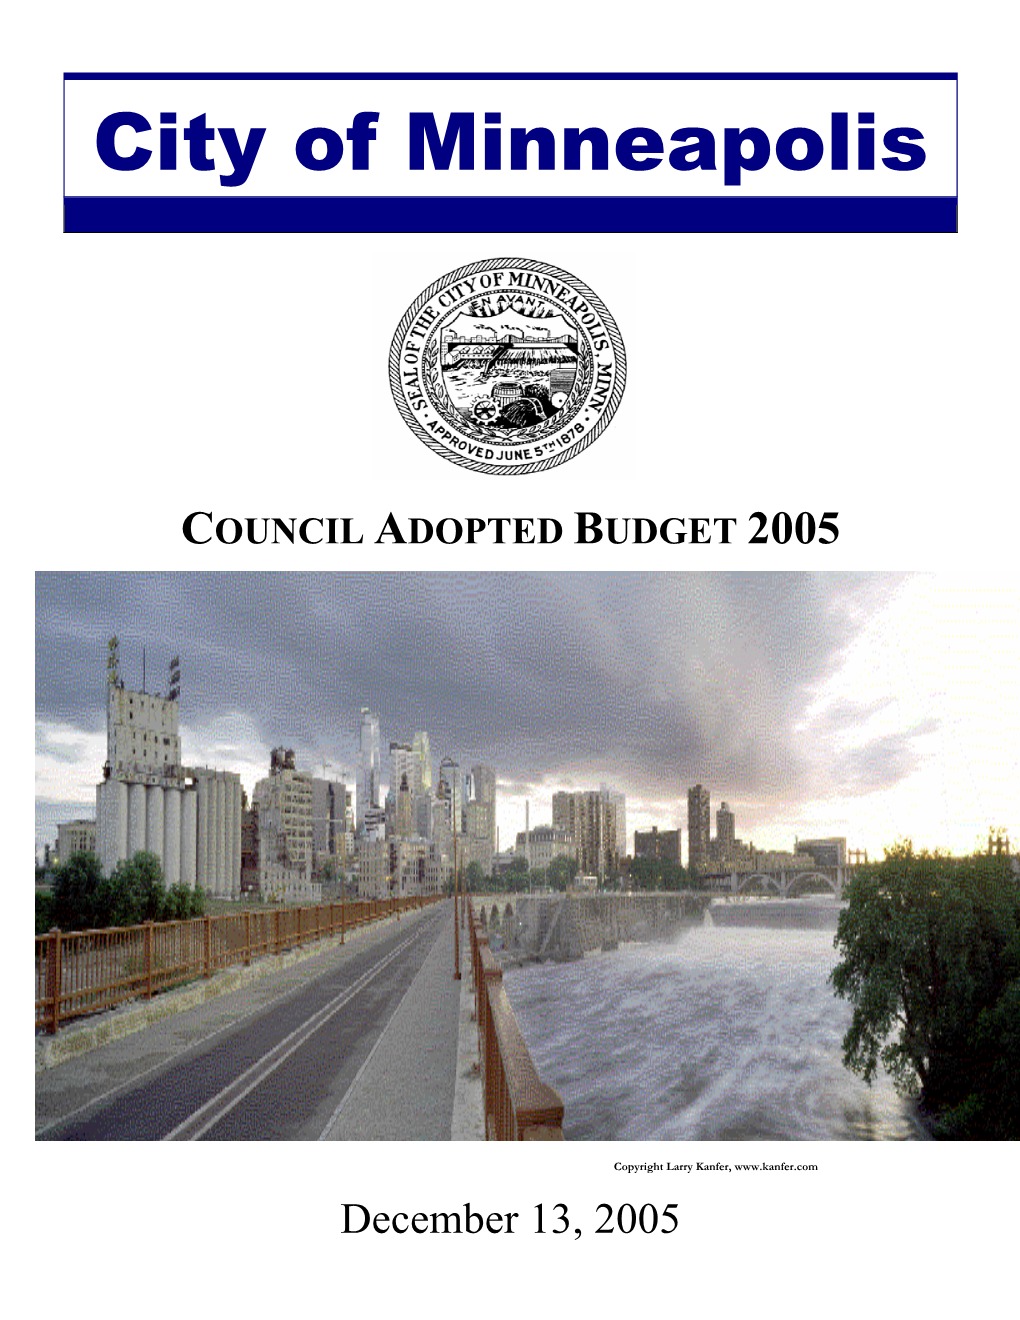 2005 Council Adopted Budget